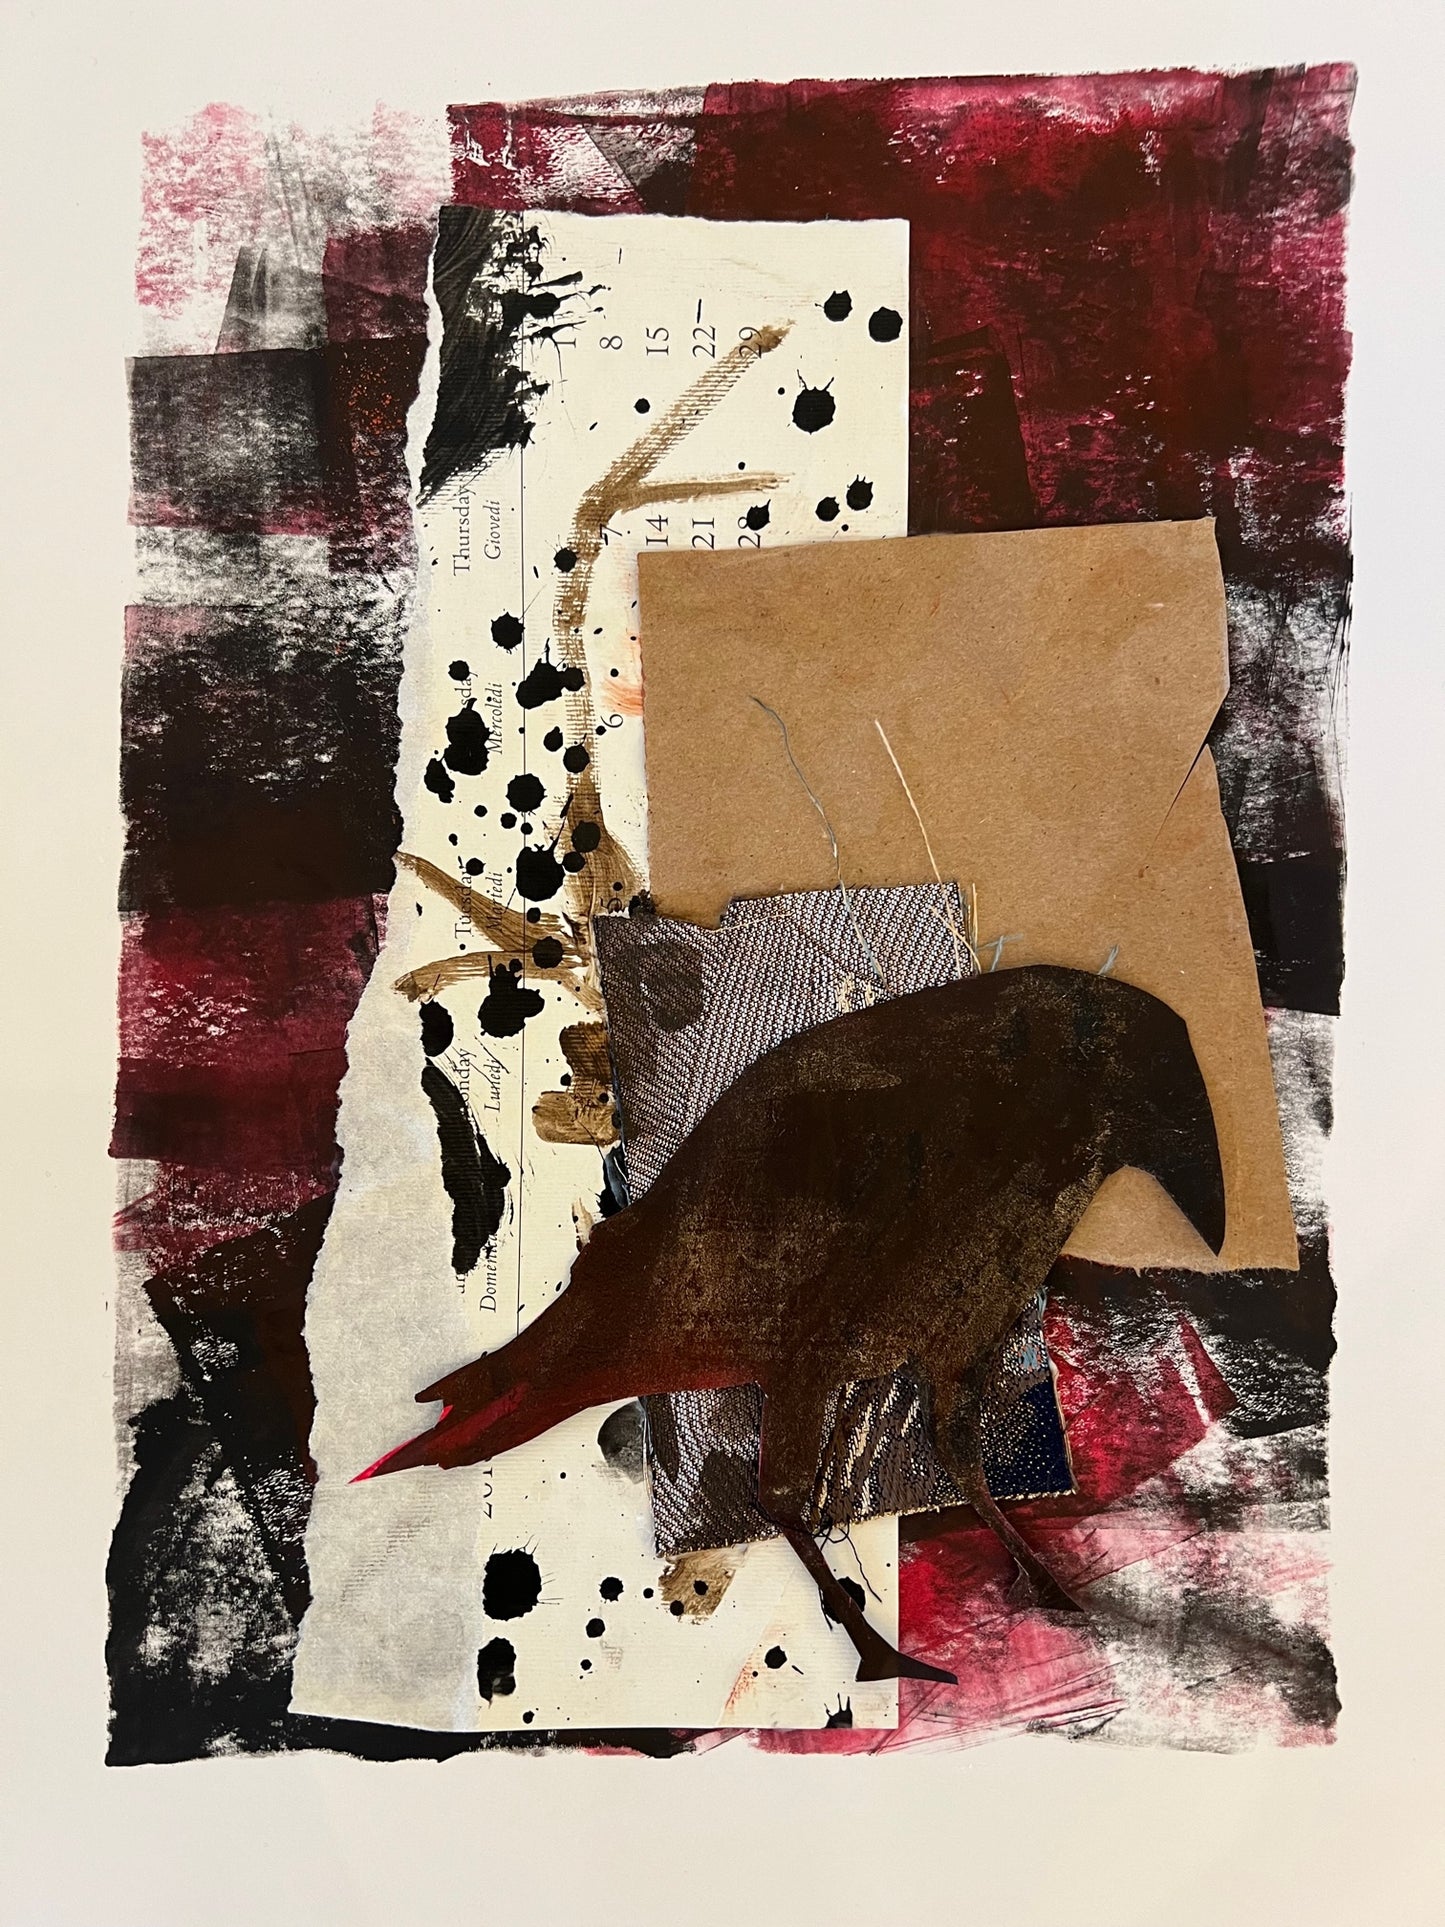 Crow with torn calendar, mixed media collage, 12" x 9"